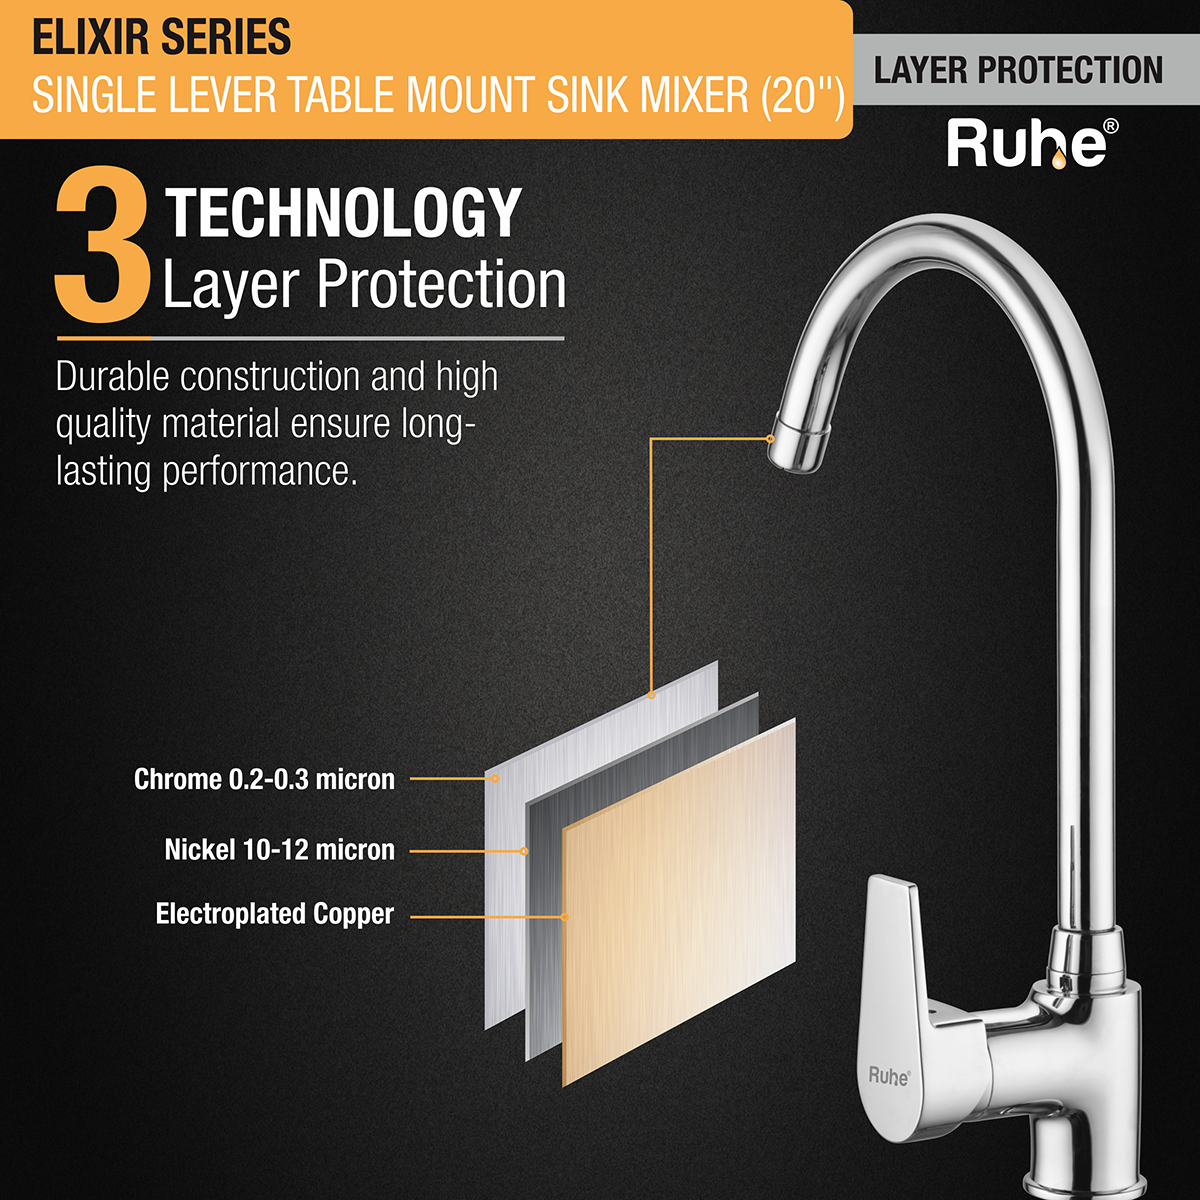 Elixir Single Lever Table Mount Sink Mixer Brass Faucet with Large (20 inches) Round Swivel Spout 3 layer protection